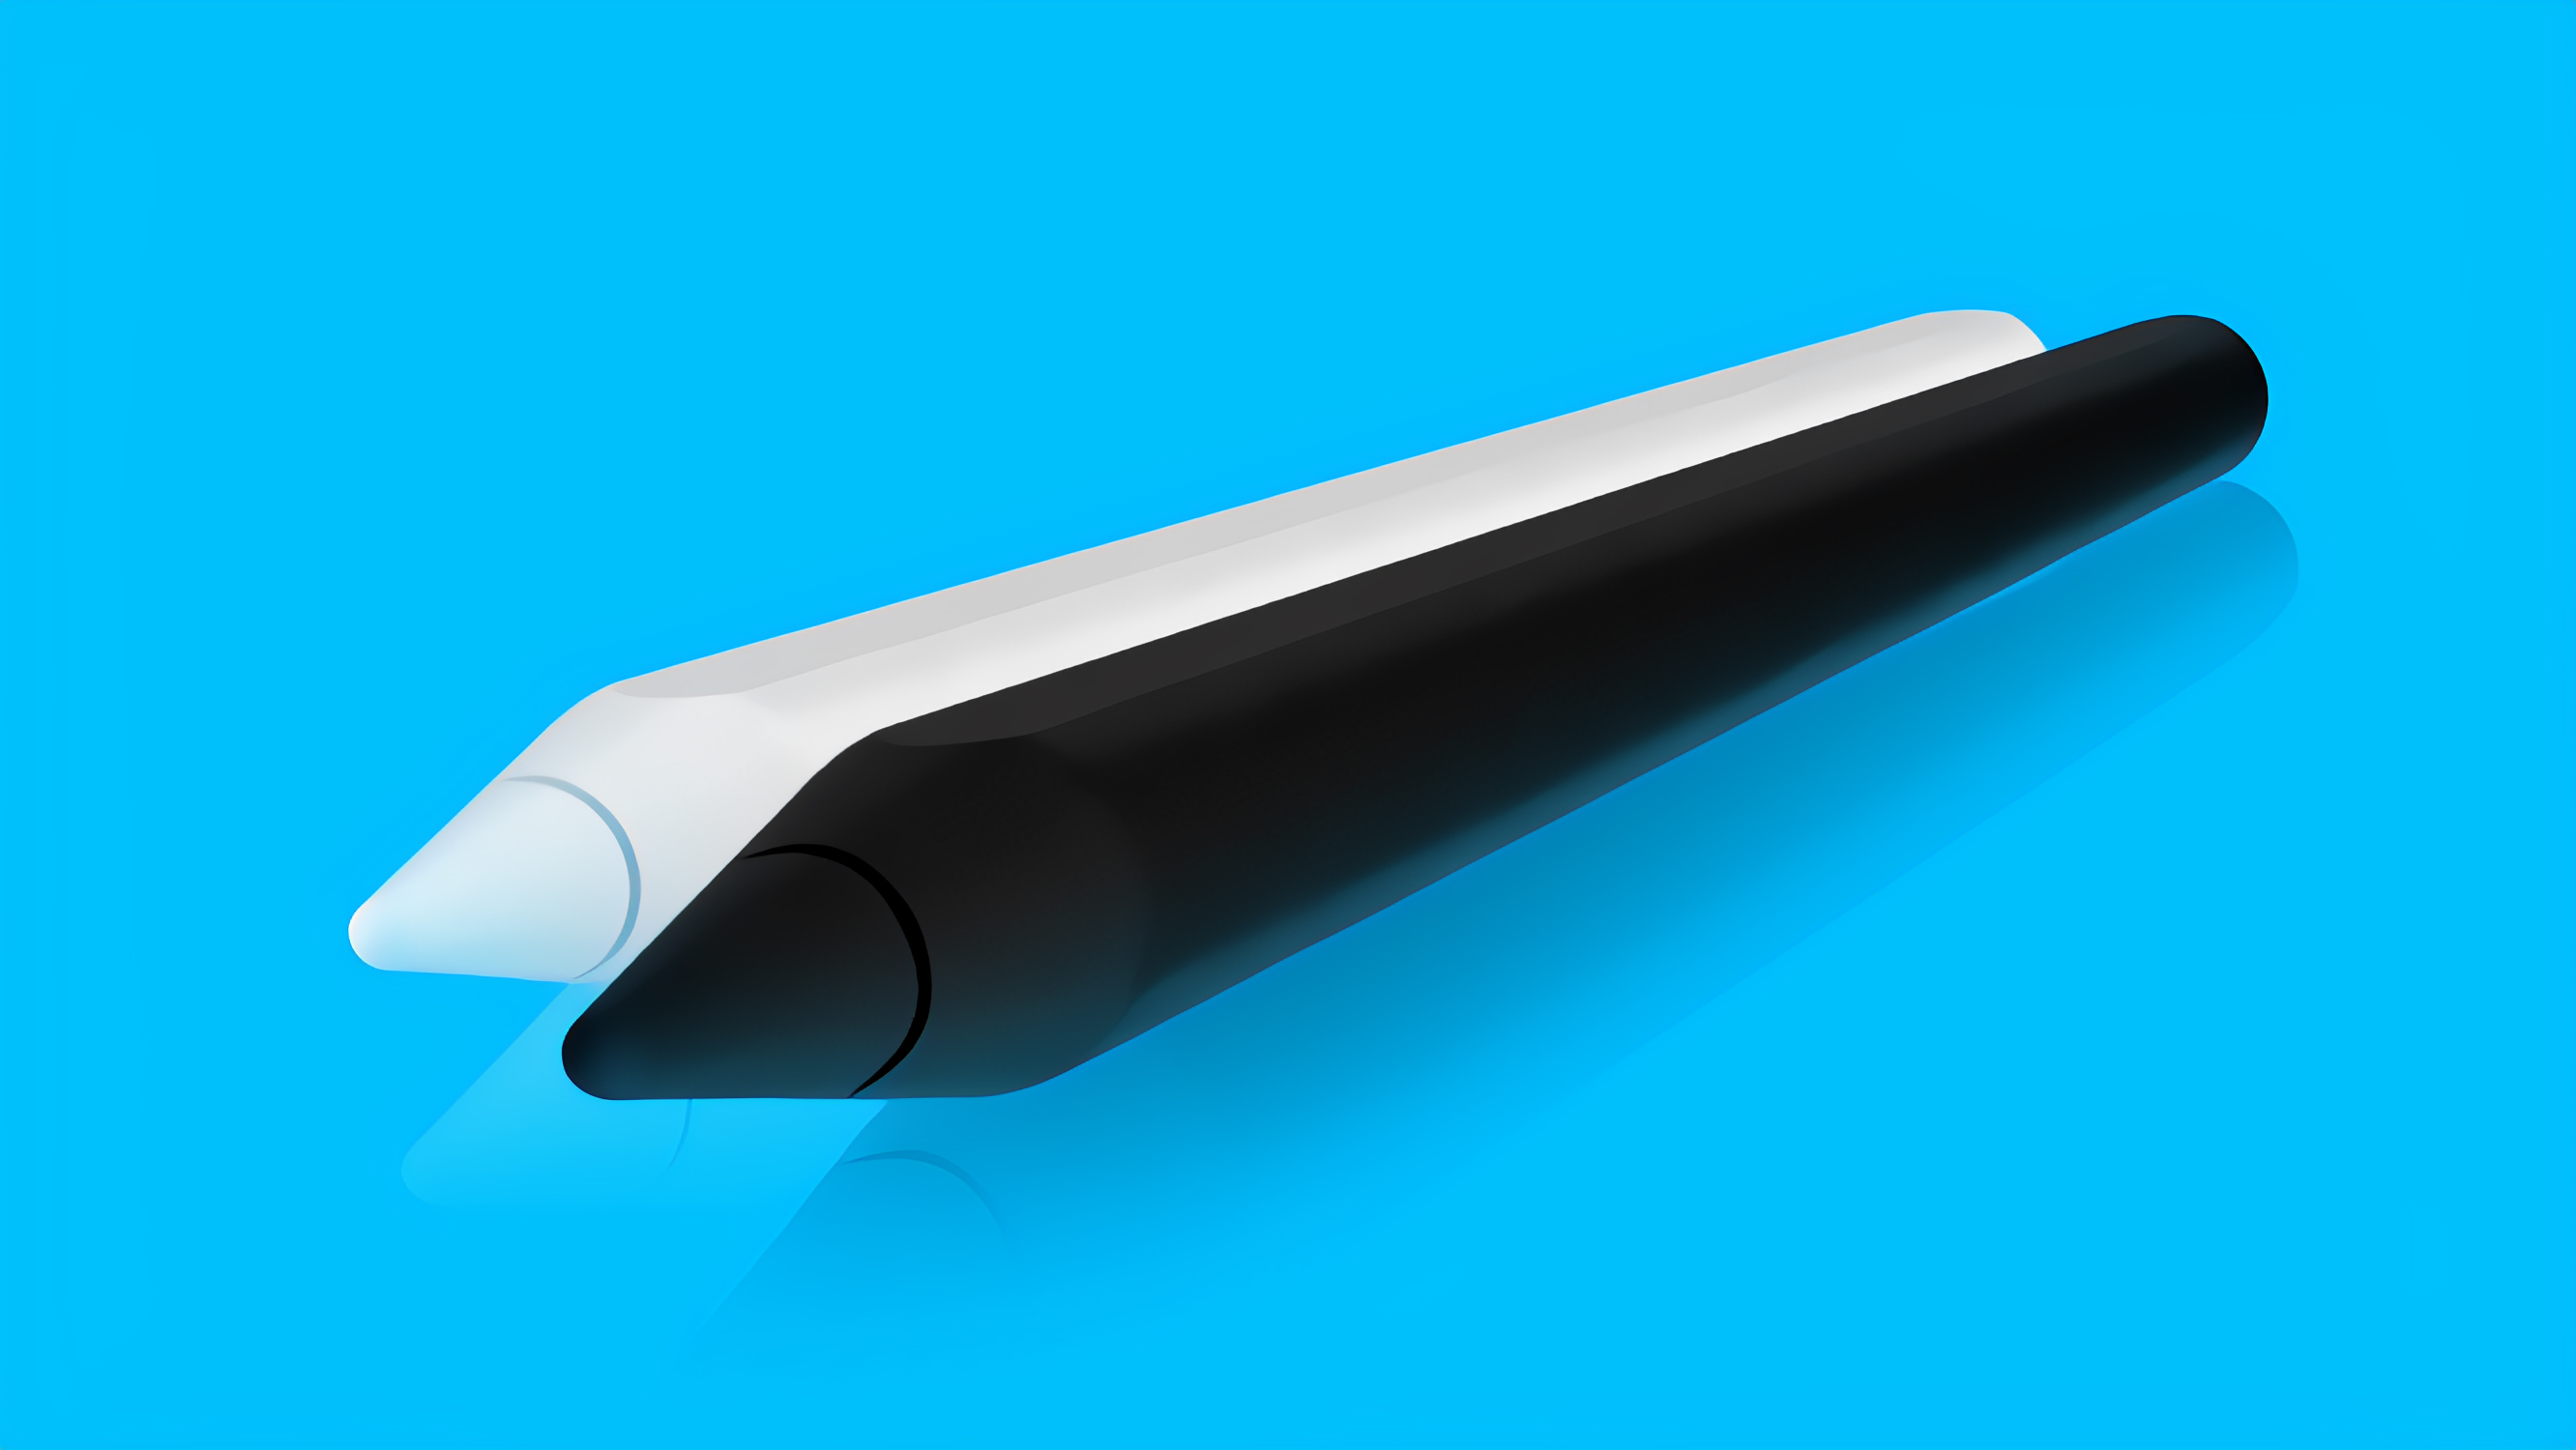 Next Apple Pencil Could Be Released in Black - MacRumors